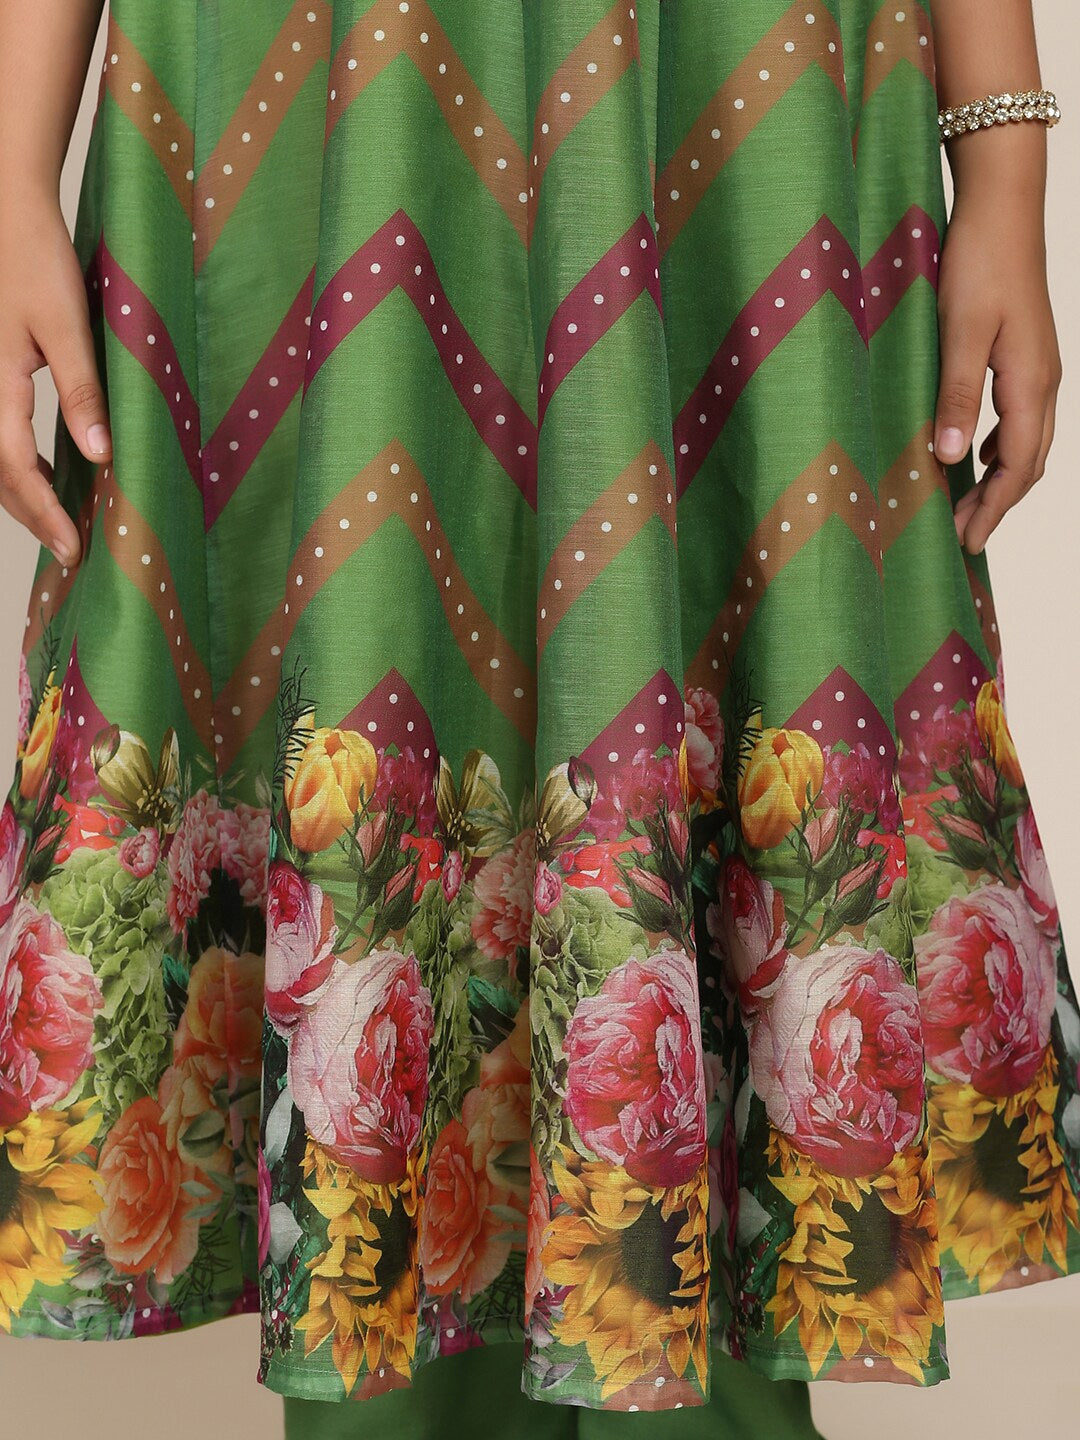 Girls Green Floral Printed Empire Kurta with Trousers & With Dupattawomensfashionfun